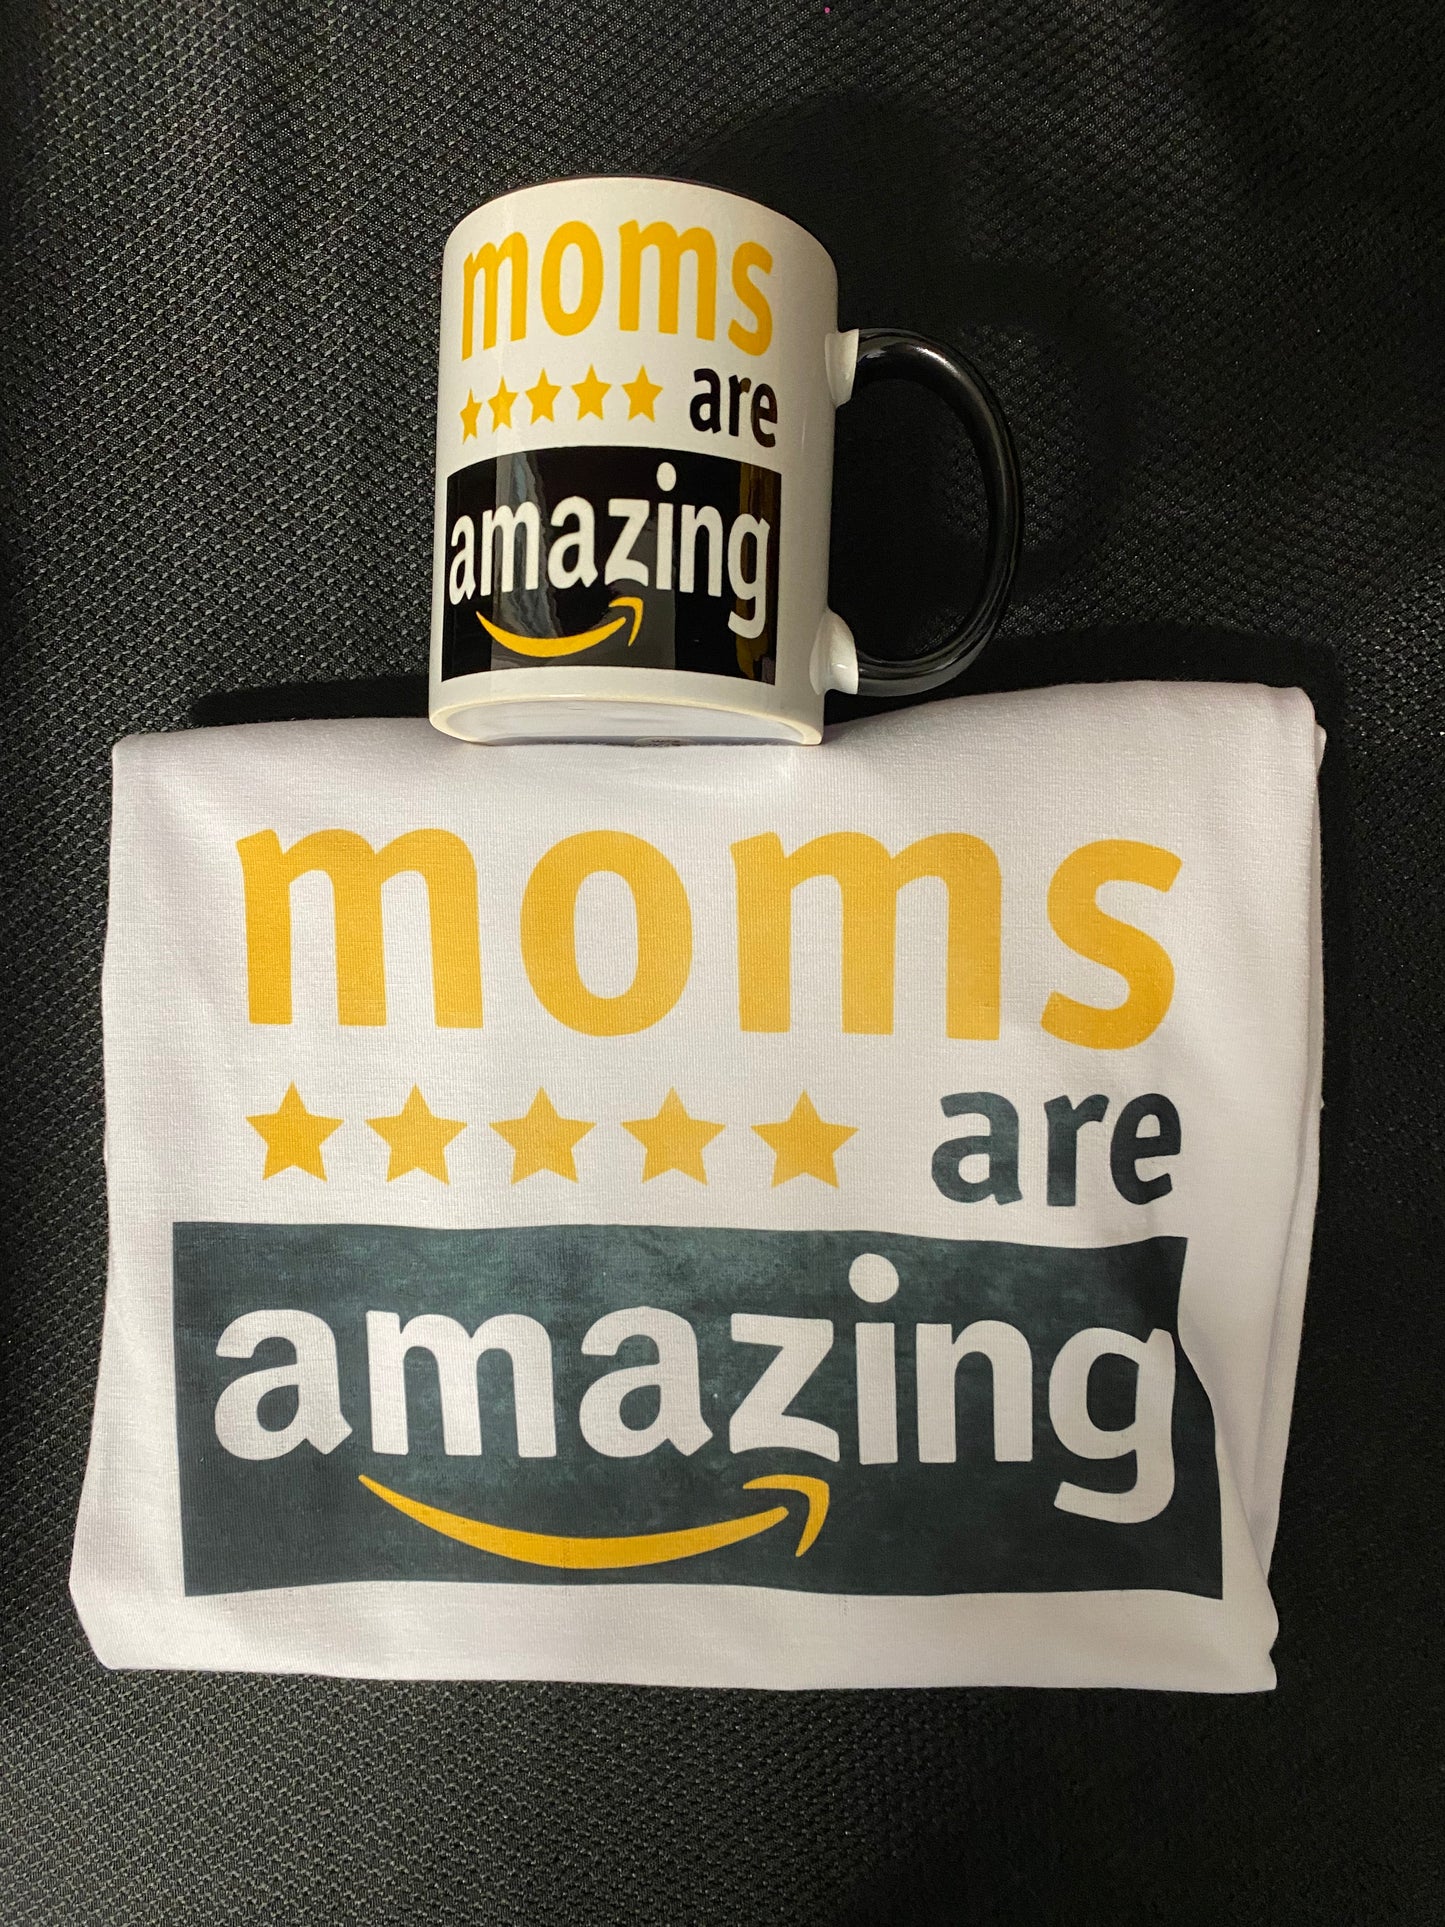 MOMS are amazing "Mother's Day Quote" T-Shirt